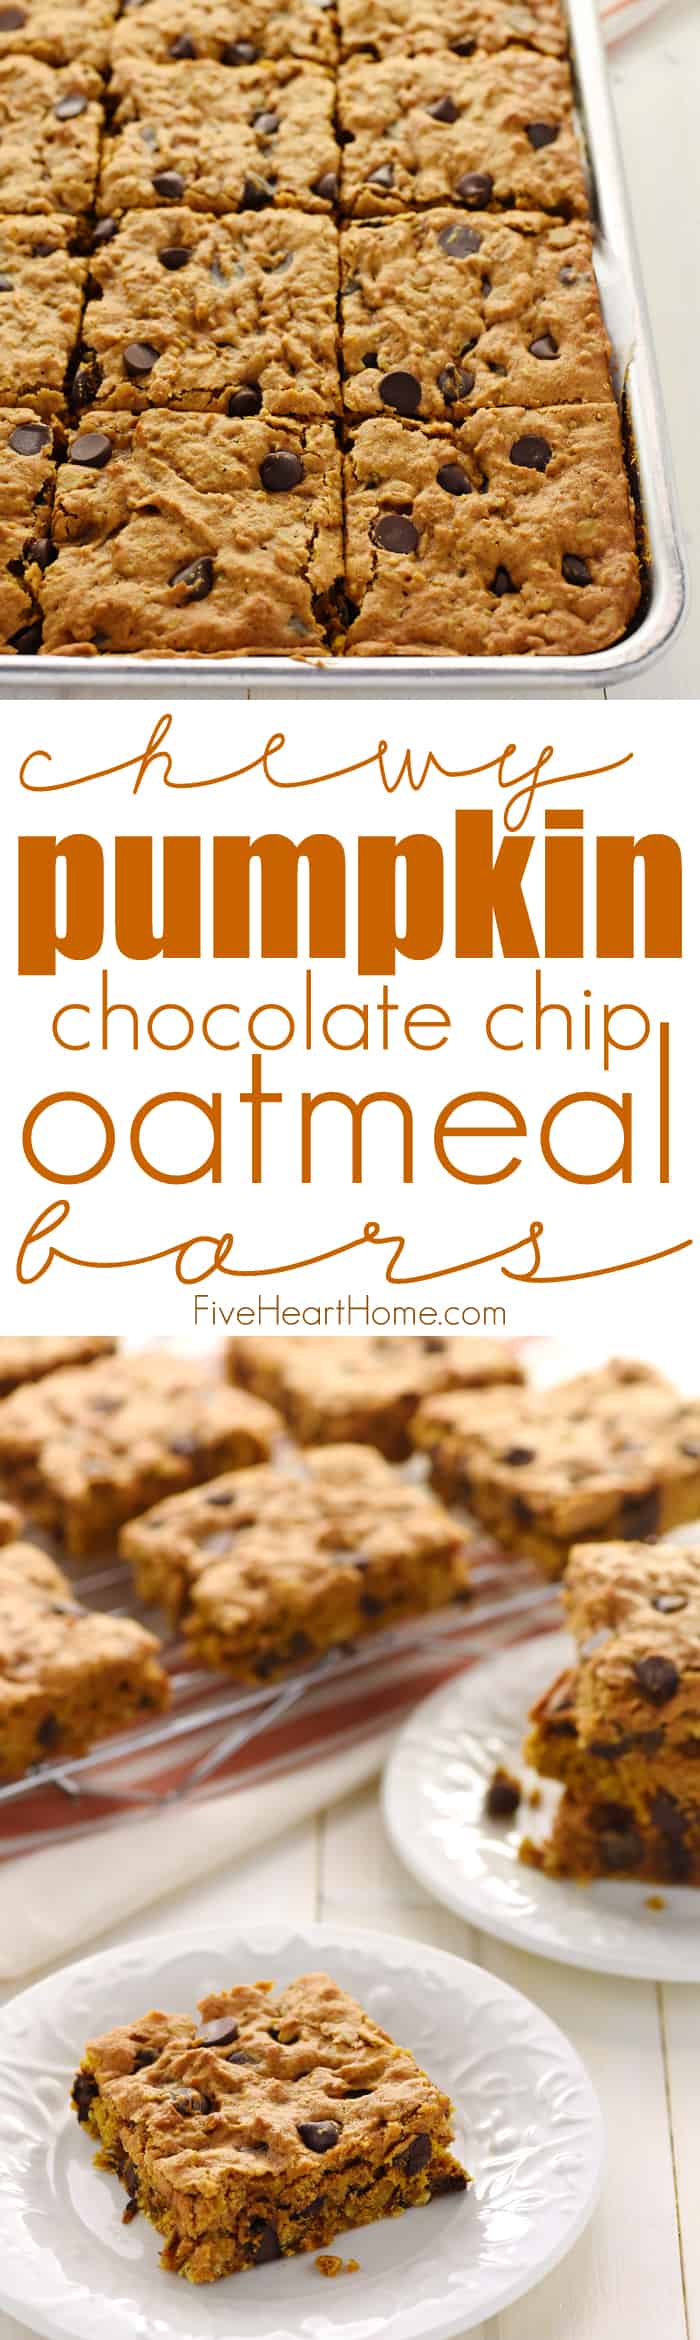 Pumpkin Chocolate Chip Bars, collage with text.